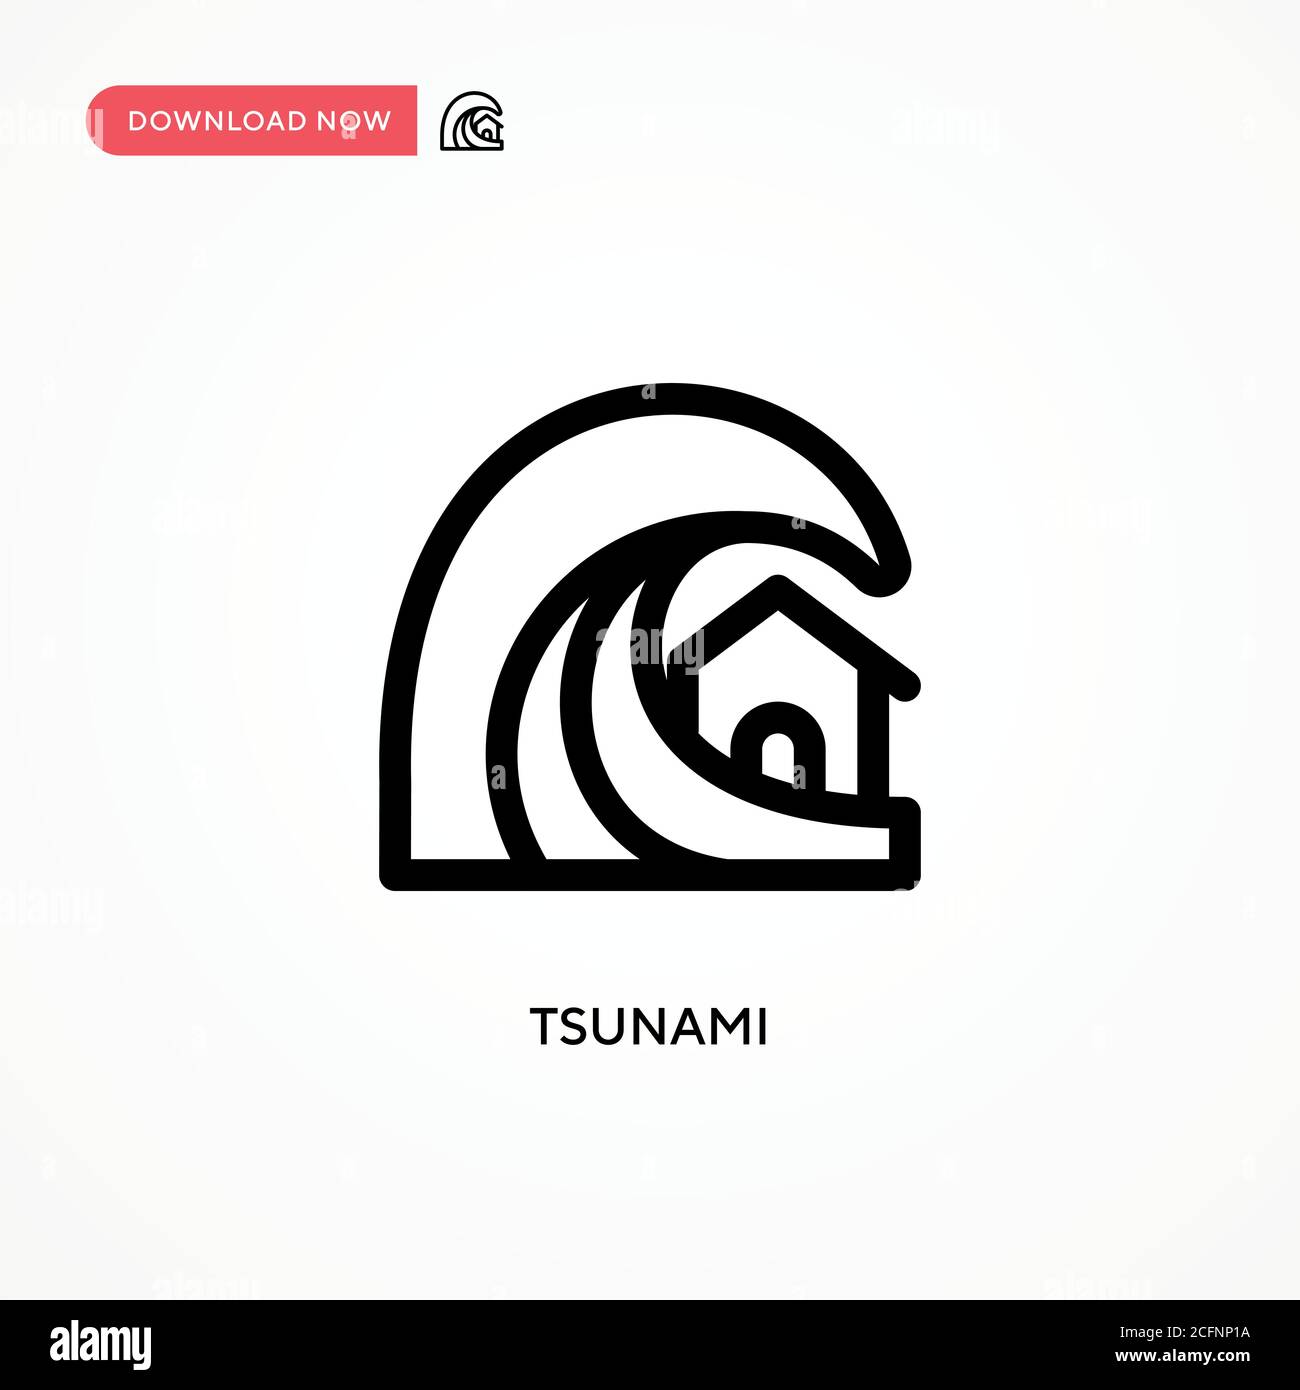 Tsunami vector icon. Modern, simple flat vector illustration for web site or mobile app Stock Vector